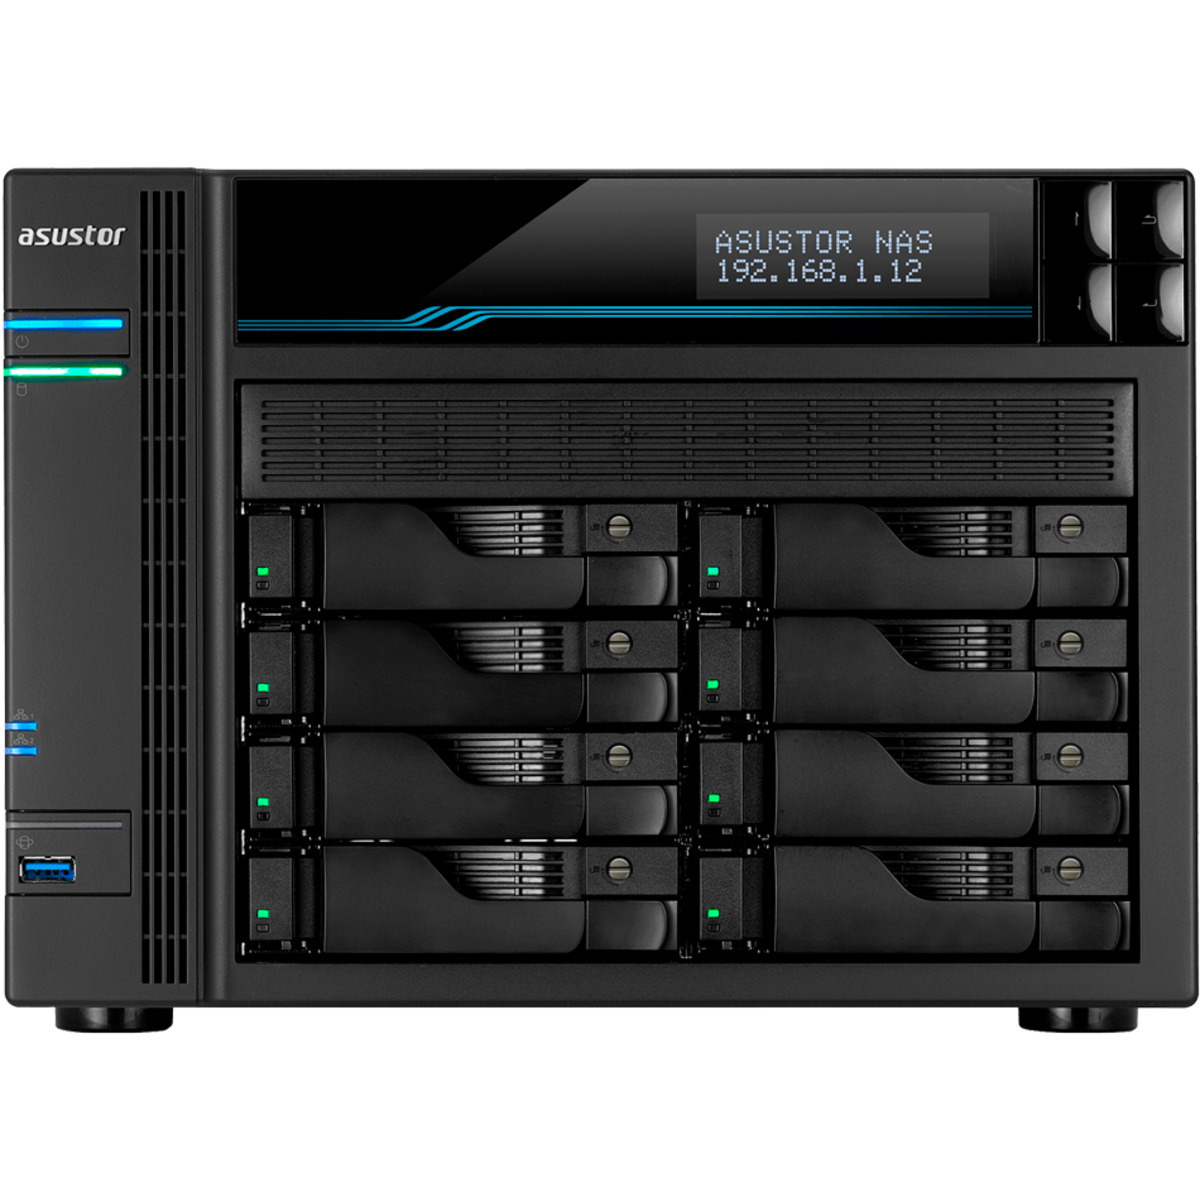 ASUSTOR AS6508T Lockerstor 8 48tb 8-Bay Desktop Multimedia / Power User / Business NAS - Network Attached Storage Device 8x6tb Seagate IronWolf ST6000VN006 3.5 5400rpm SATA 6Gb/s HDD NAS Class Drives Installed - Burn-In Tested - ON SALE - FREE RAM UPGRADE AS6508T Lockerstor 8